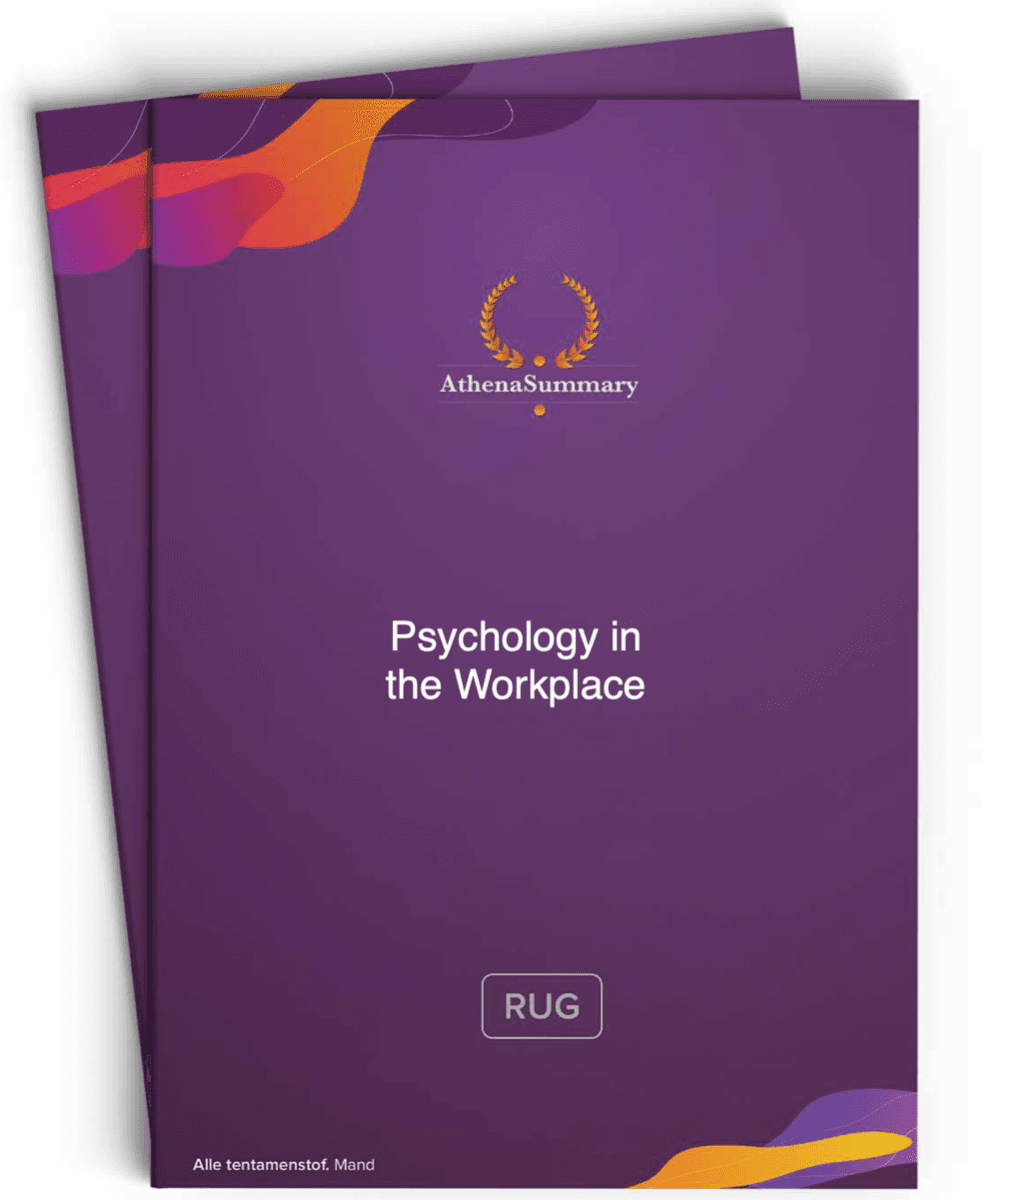 Literature summary: Psychology in the Workplace